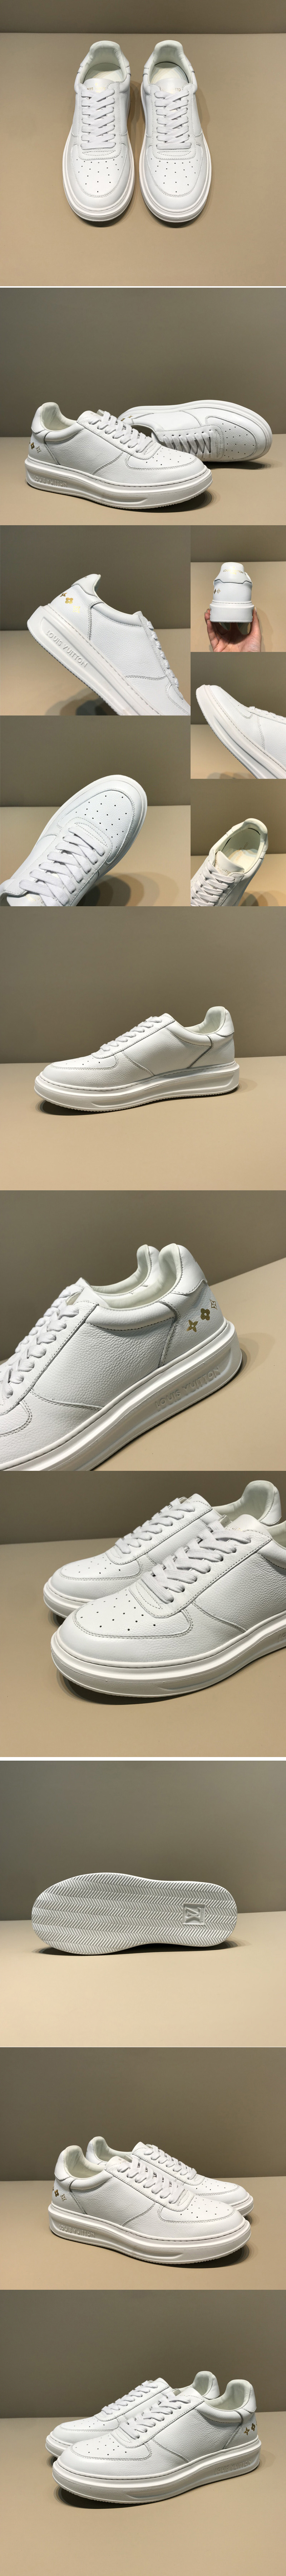 Replica Louis Vuitton 1A5XIF LV Beverly Hills Sneaker in White calf leather